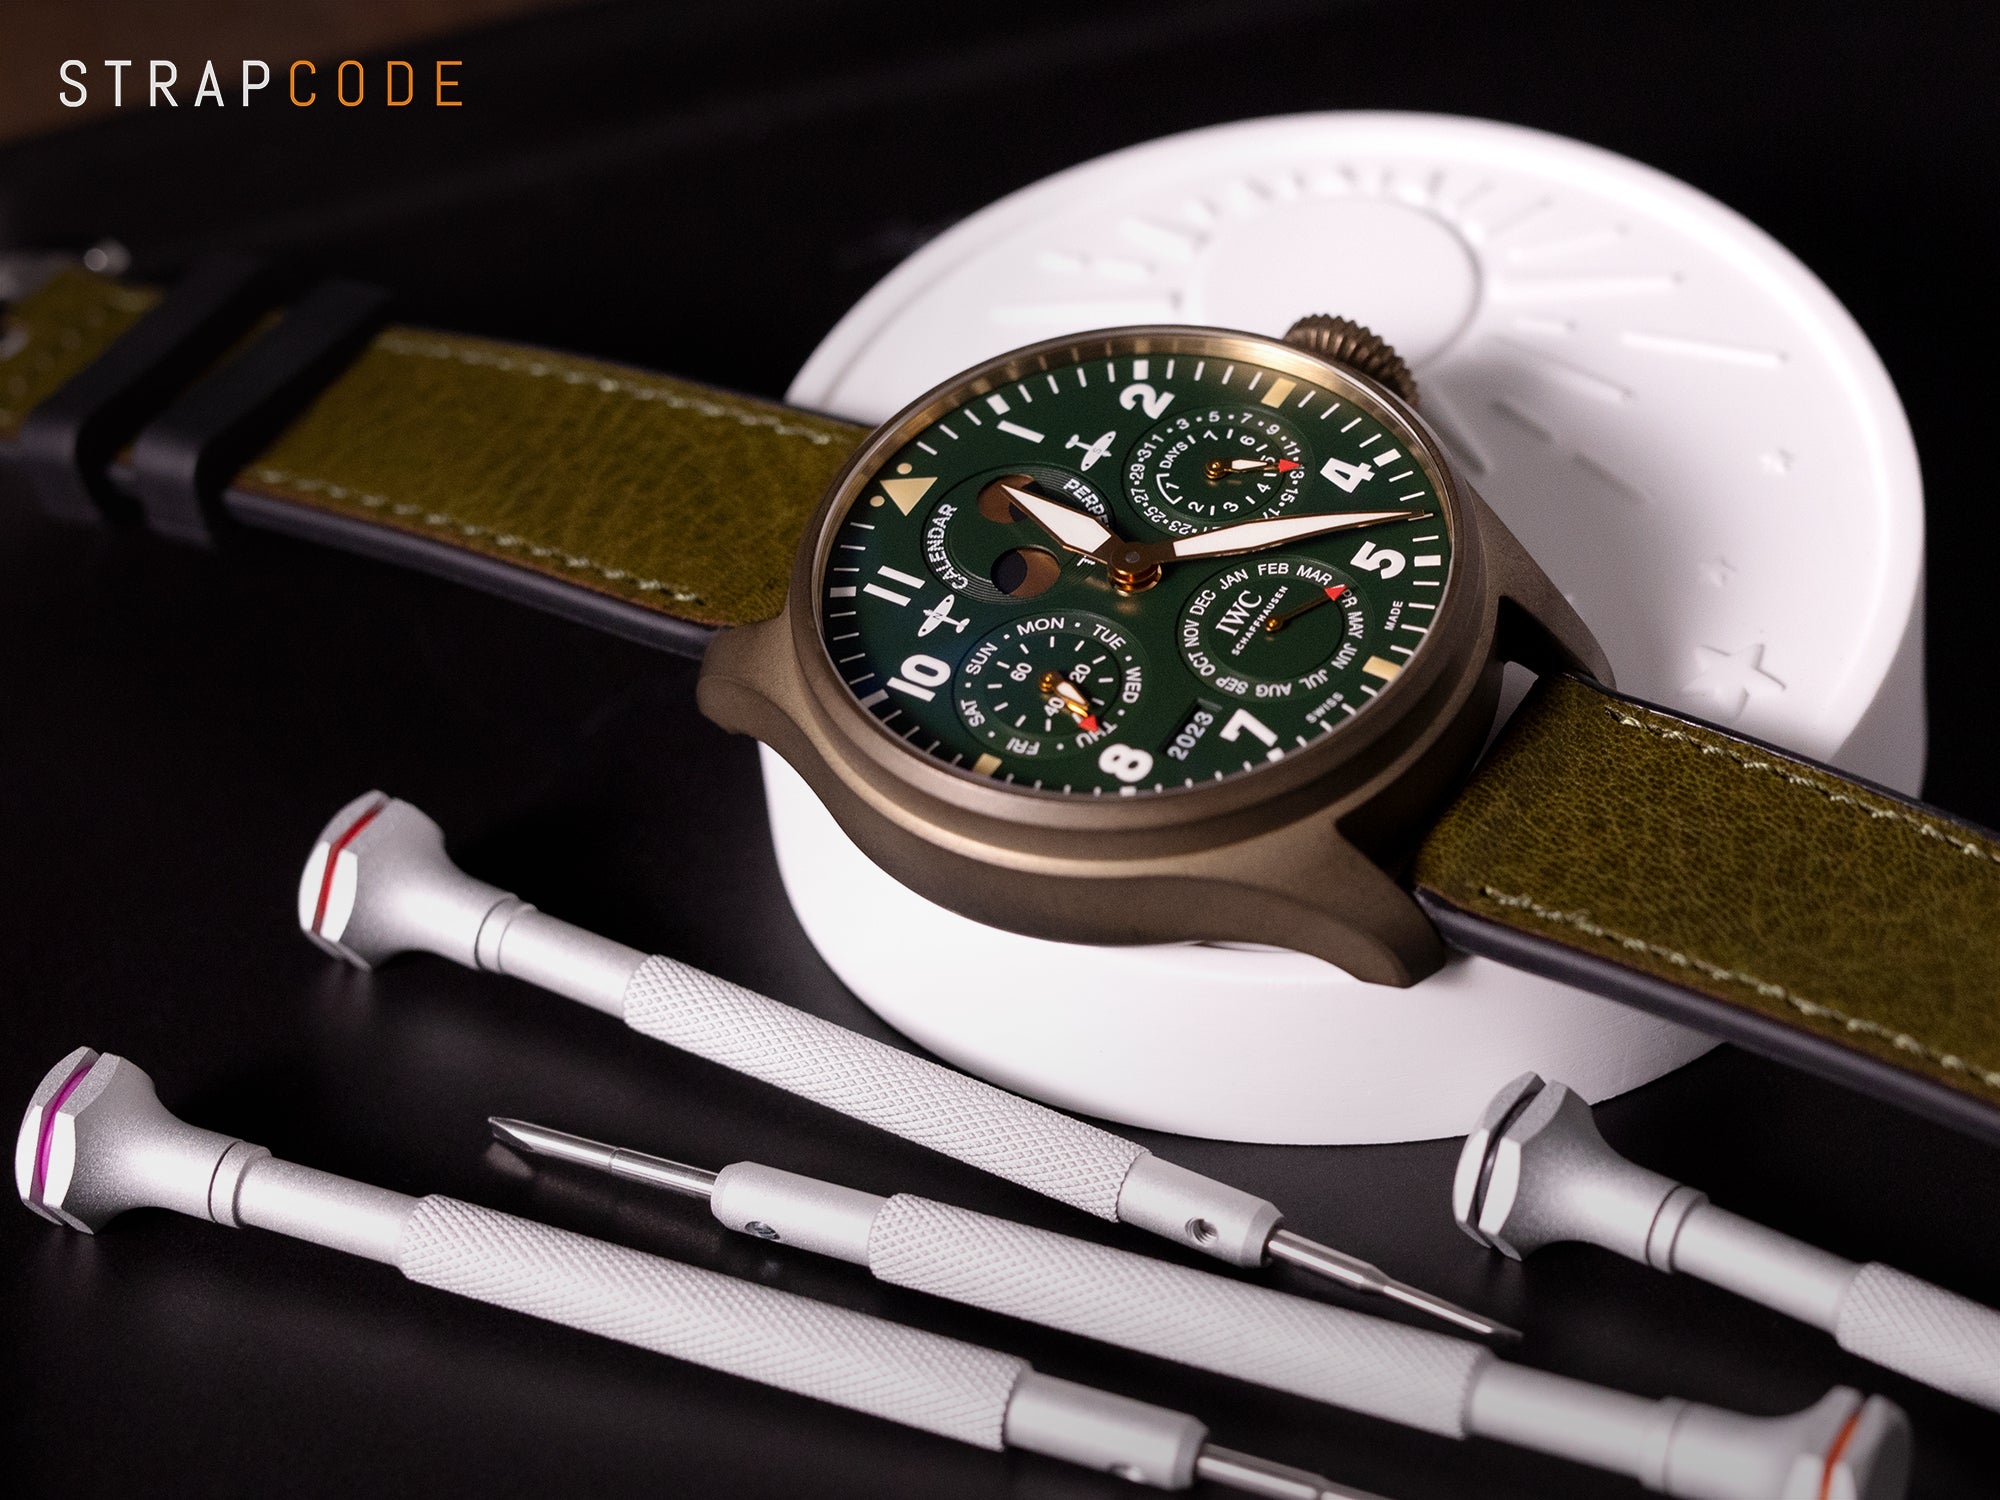 IWC Big Pilot's Bronze Perpetual Calendar and Green Quick Release Hybrid Leather FKM Rubber strap by Strapcode watch bands